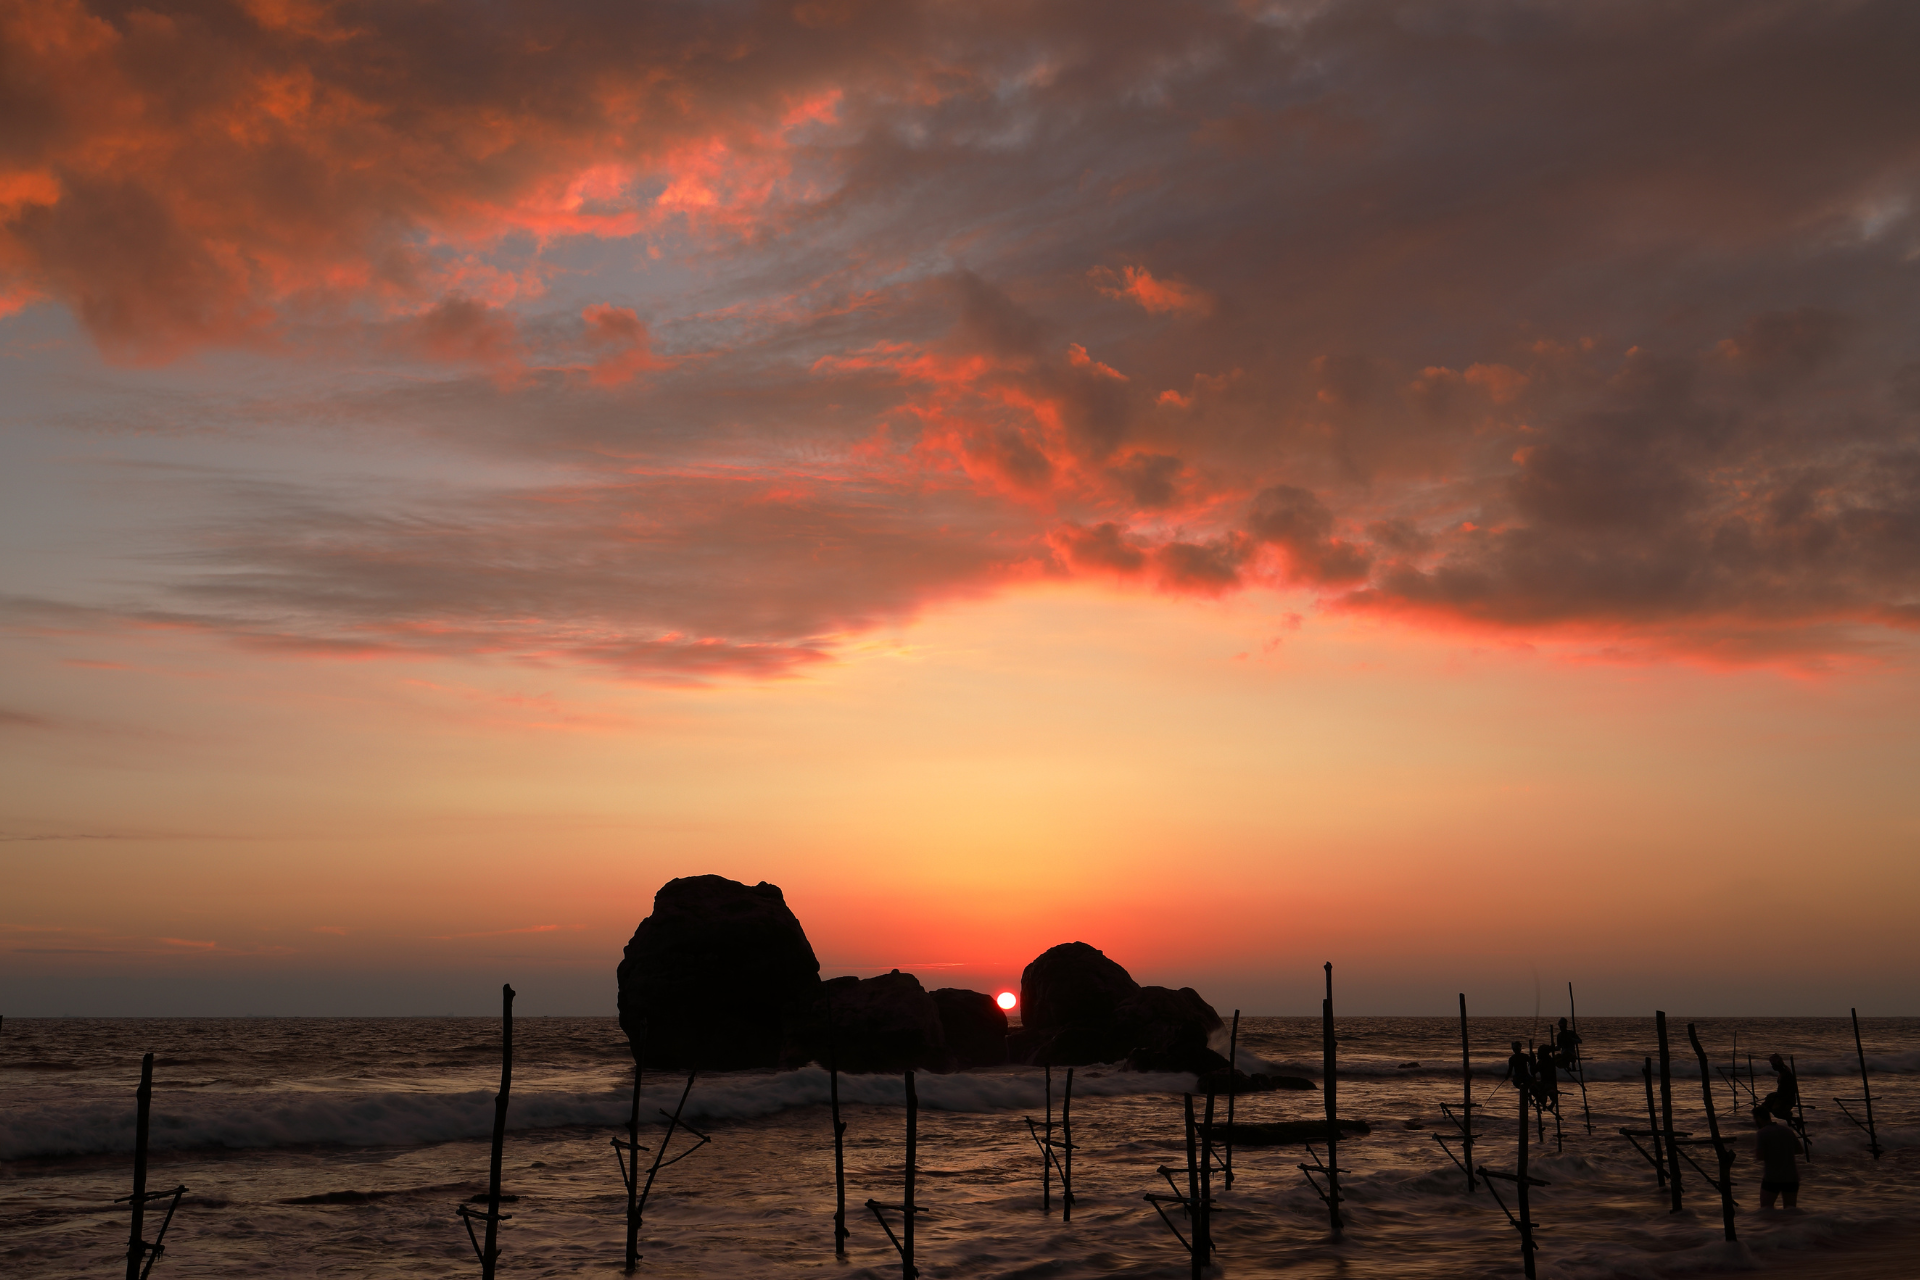 Sunset at Koggala Beach near Galle, with fishing stilts scattered across the beach